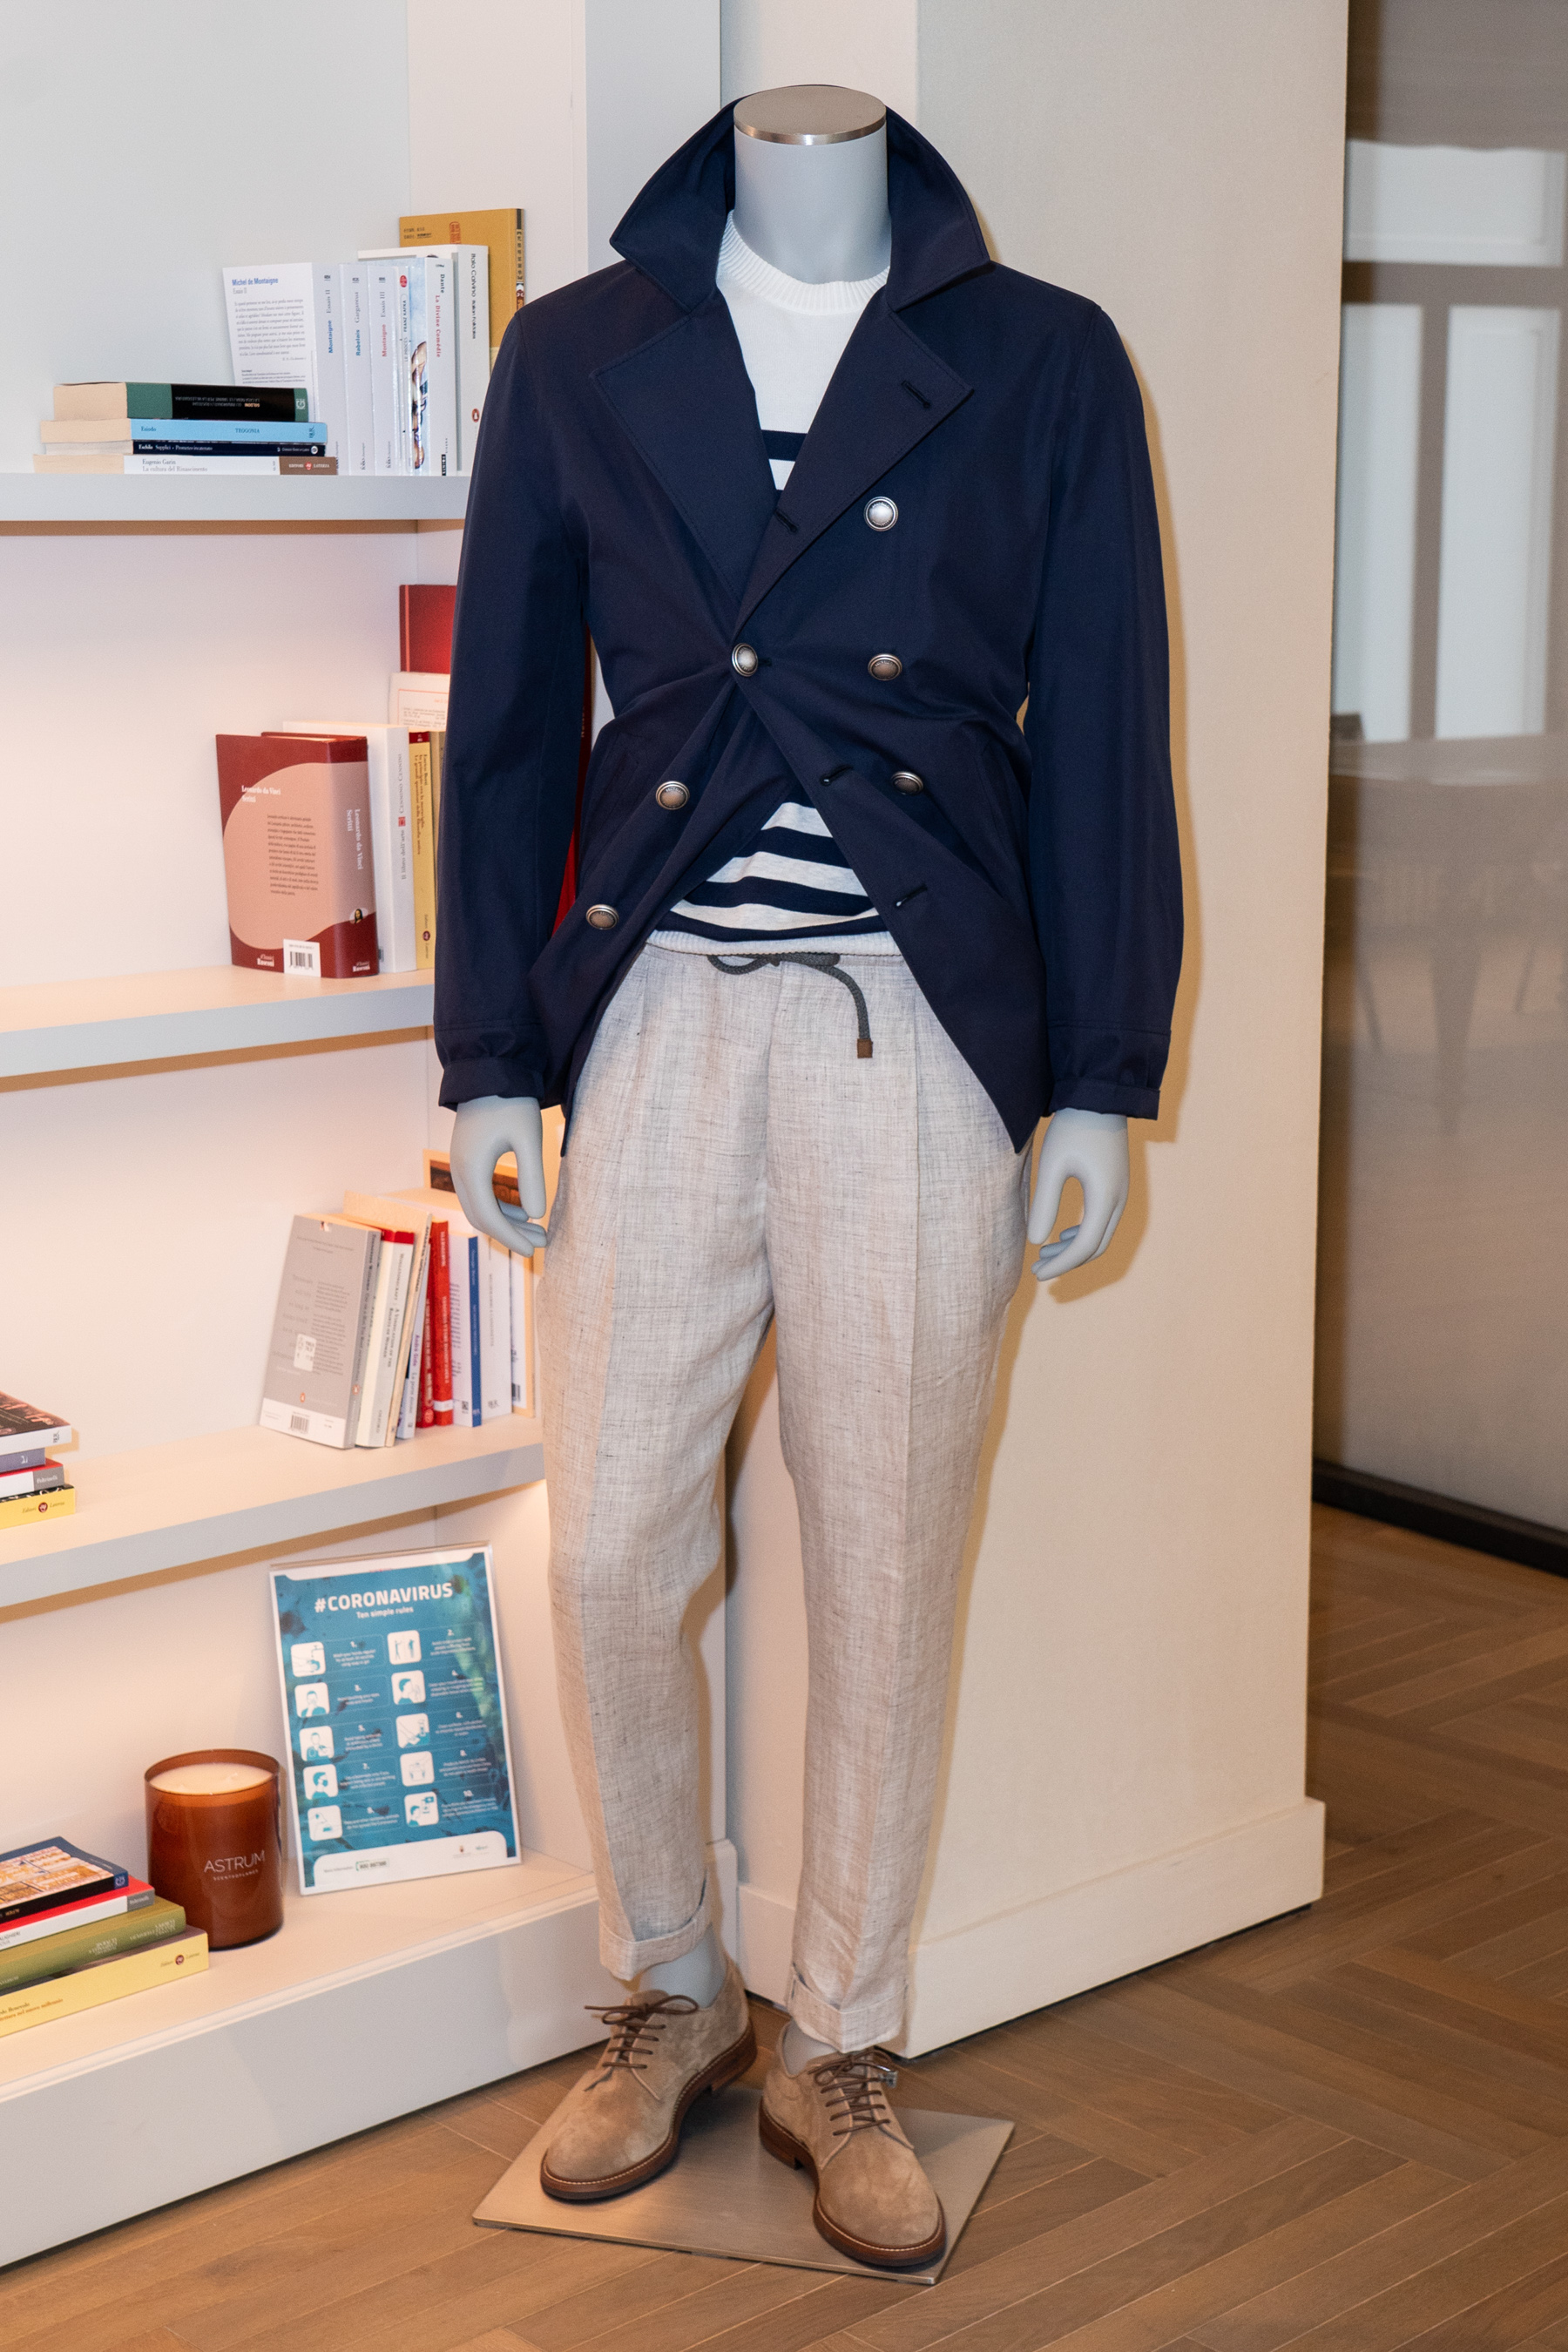 A look from Brunello Cucinelli's Spring 2022 collection. Photo